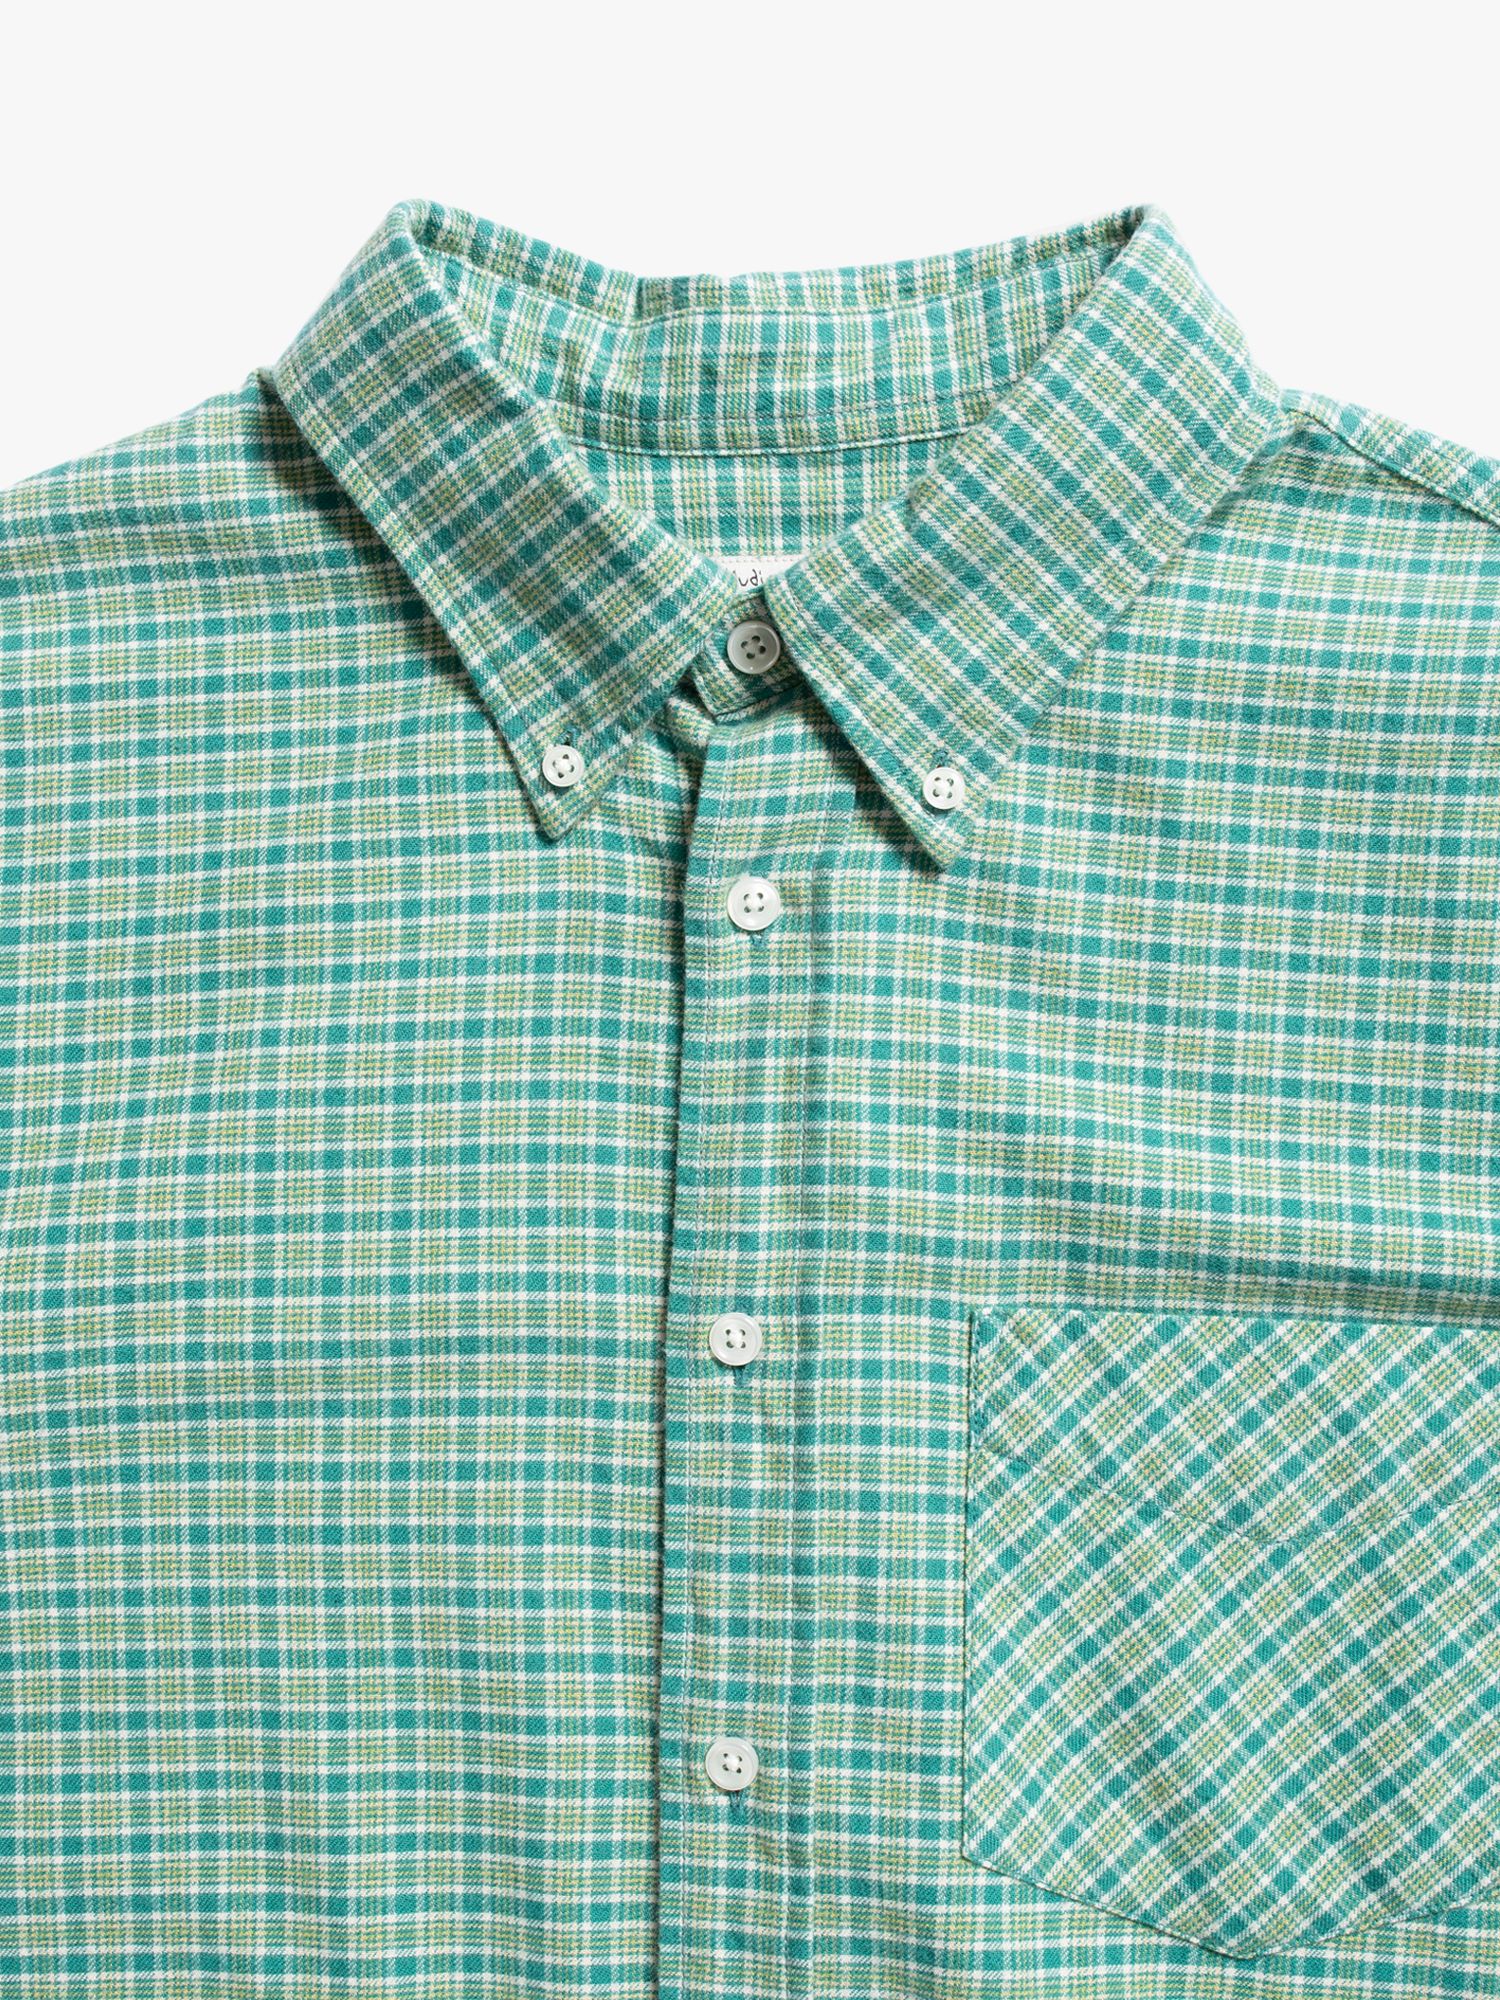 Nudie Jeans Flip Check Shirt, Green, S